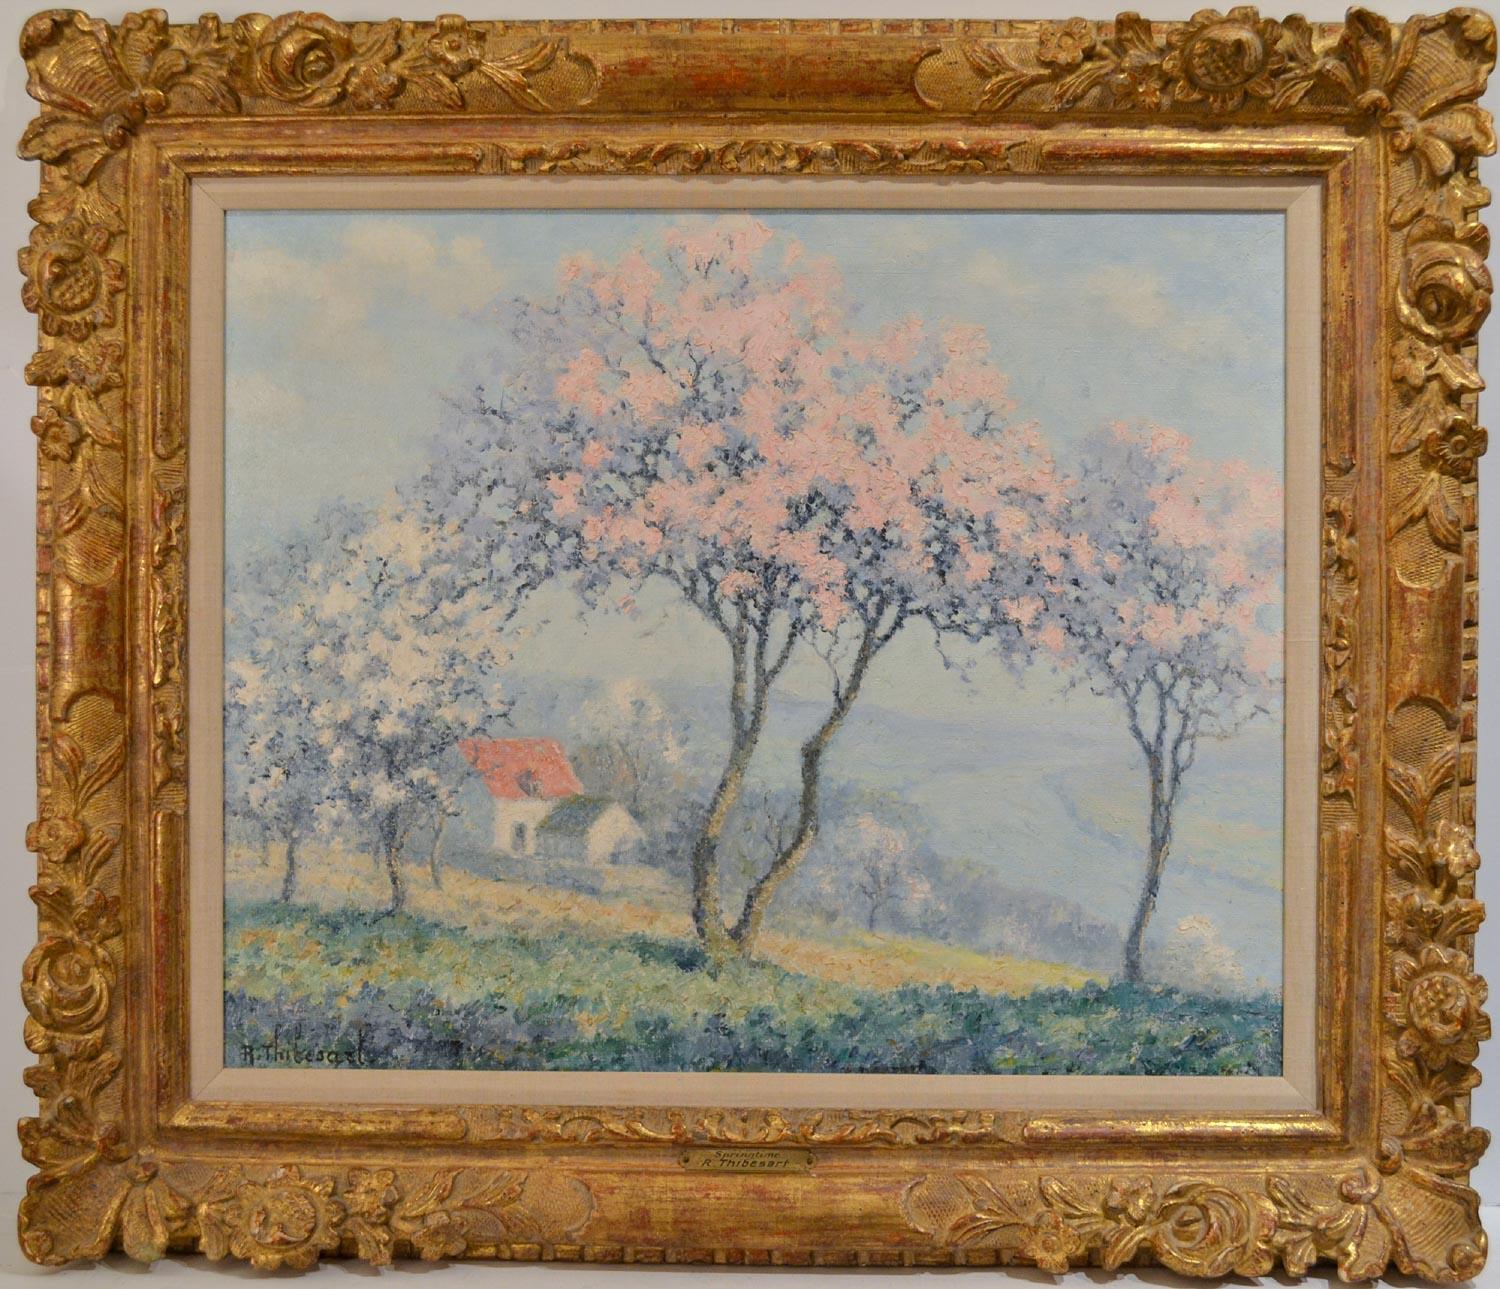 French Impressionist "Springtime " Oil on Canvas 20 x 24 includes book on artist - Painting by Raymond Thibesart